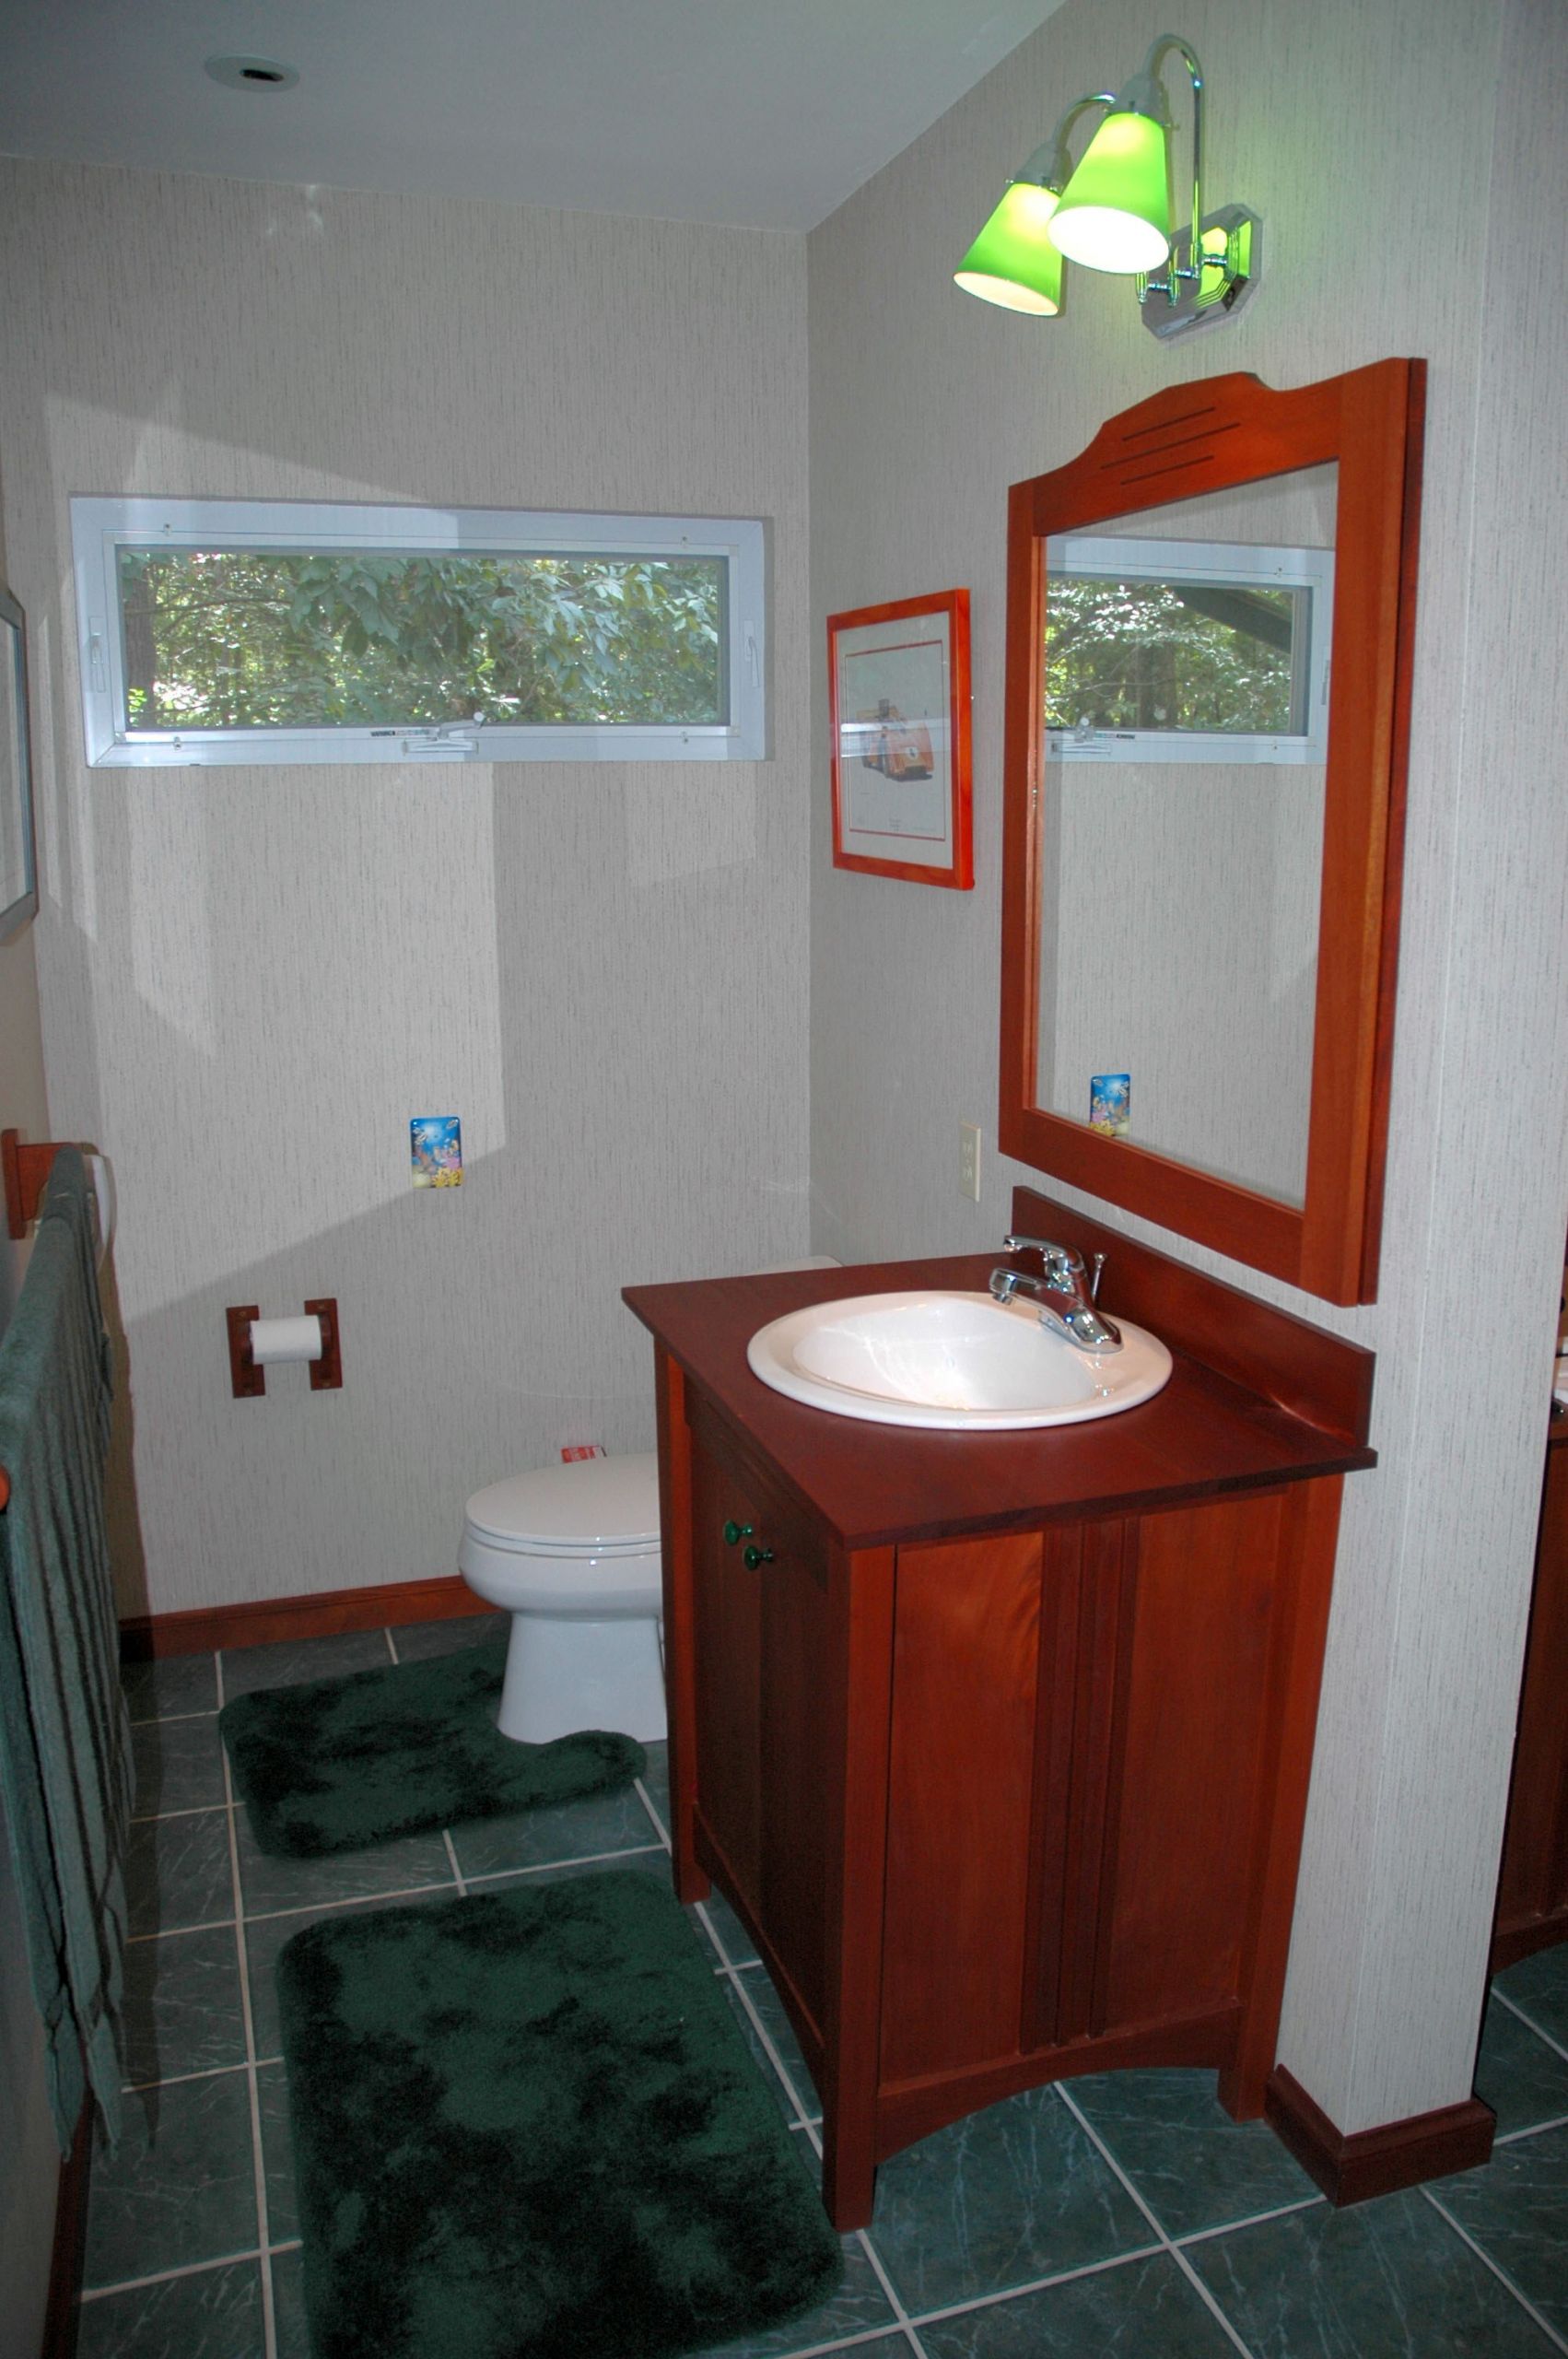 Bathroom Remodeling Tallahassee
 Dender Construction Tallahassee About Us What We Do